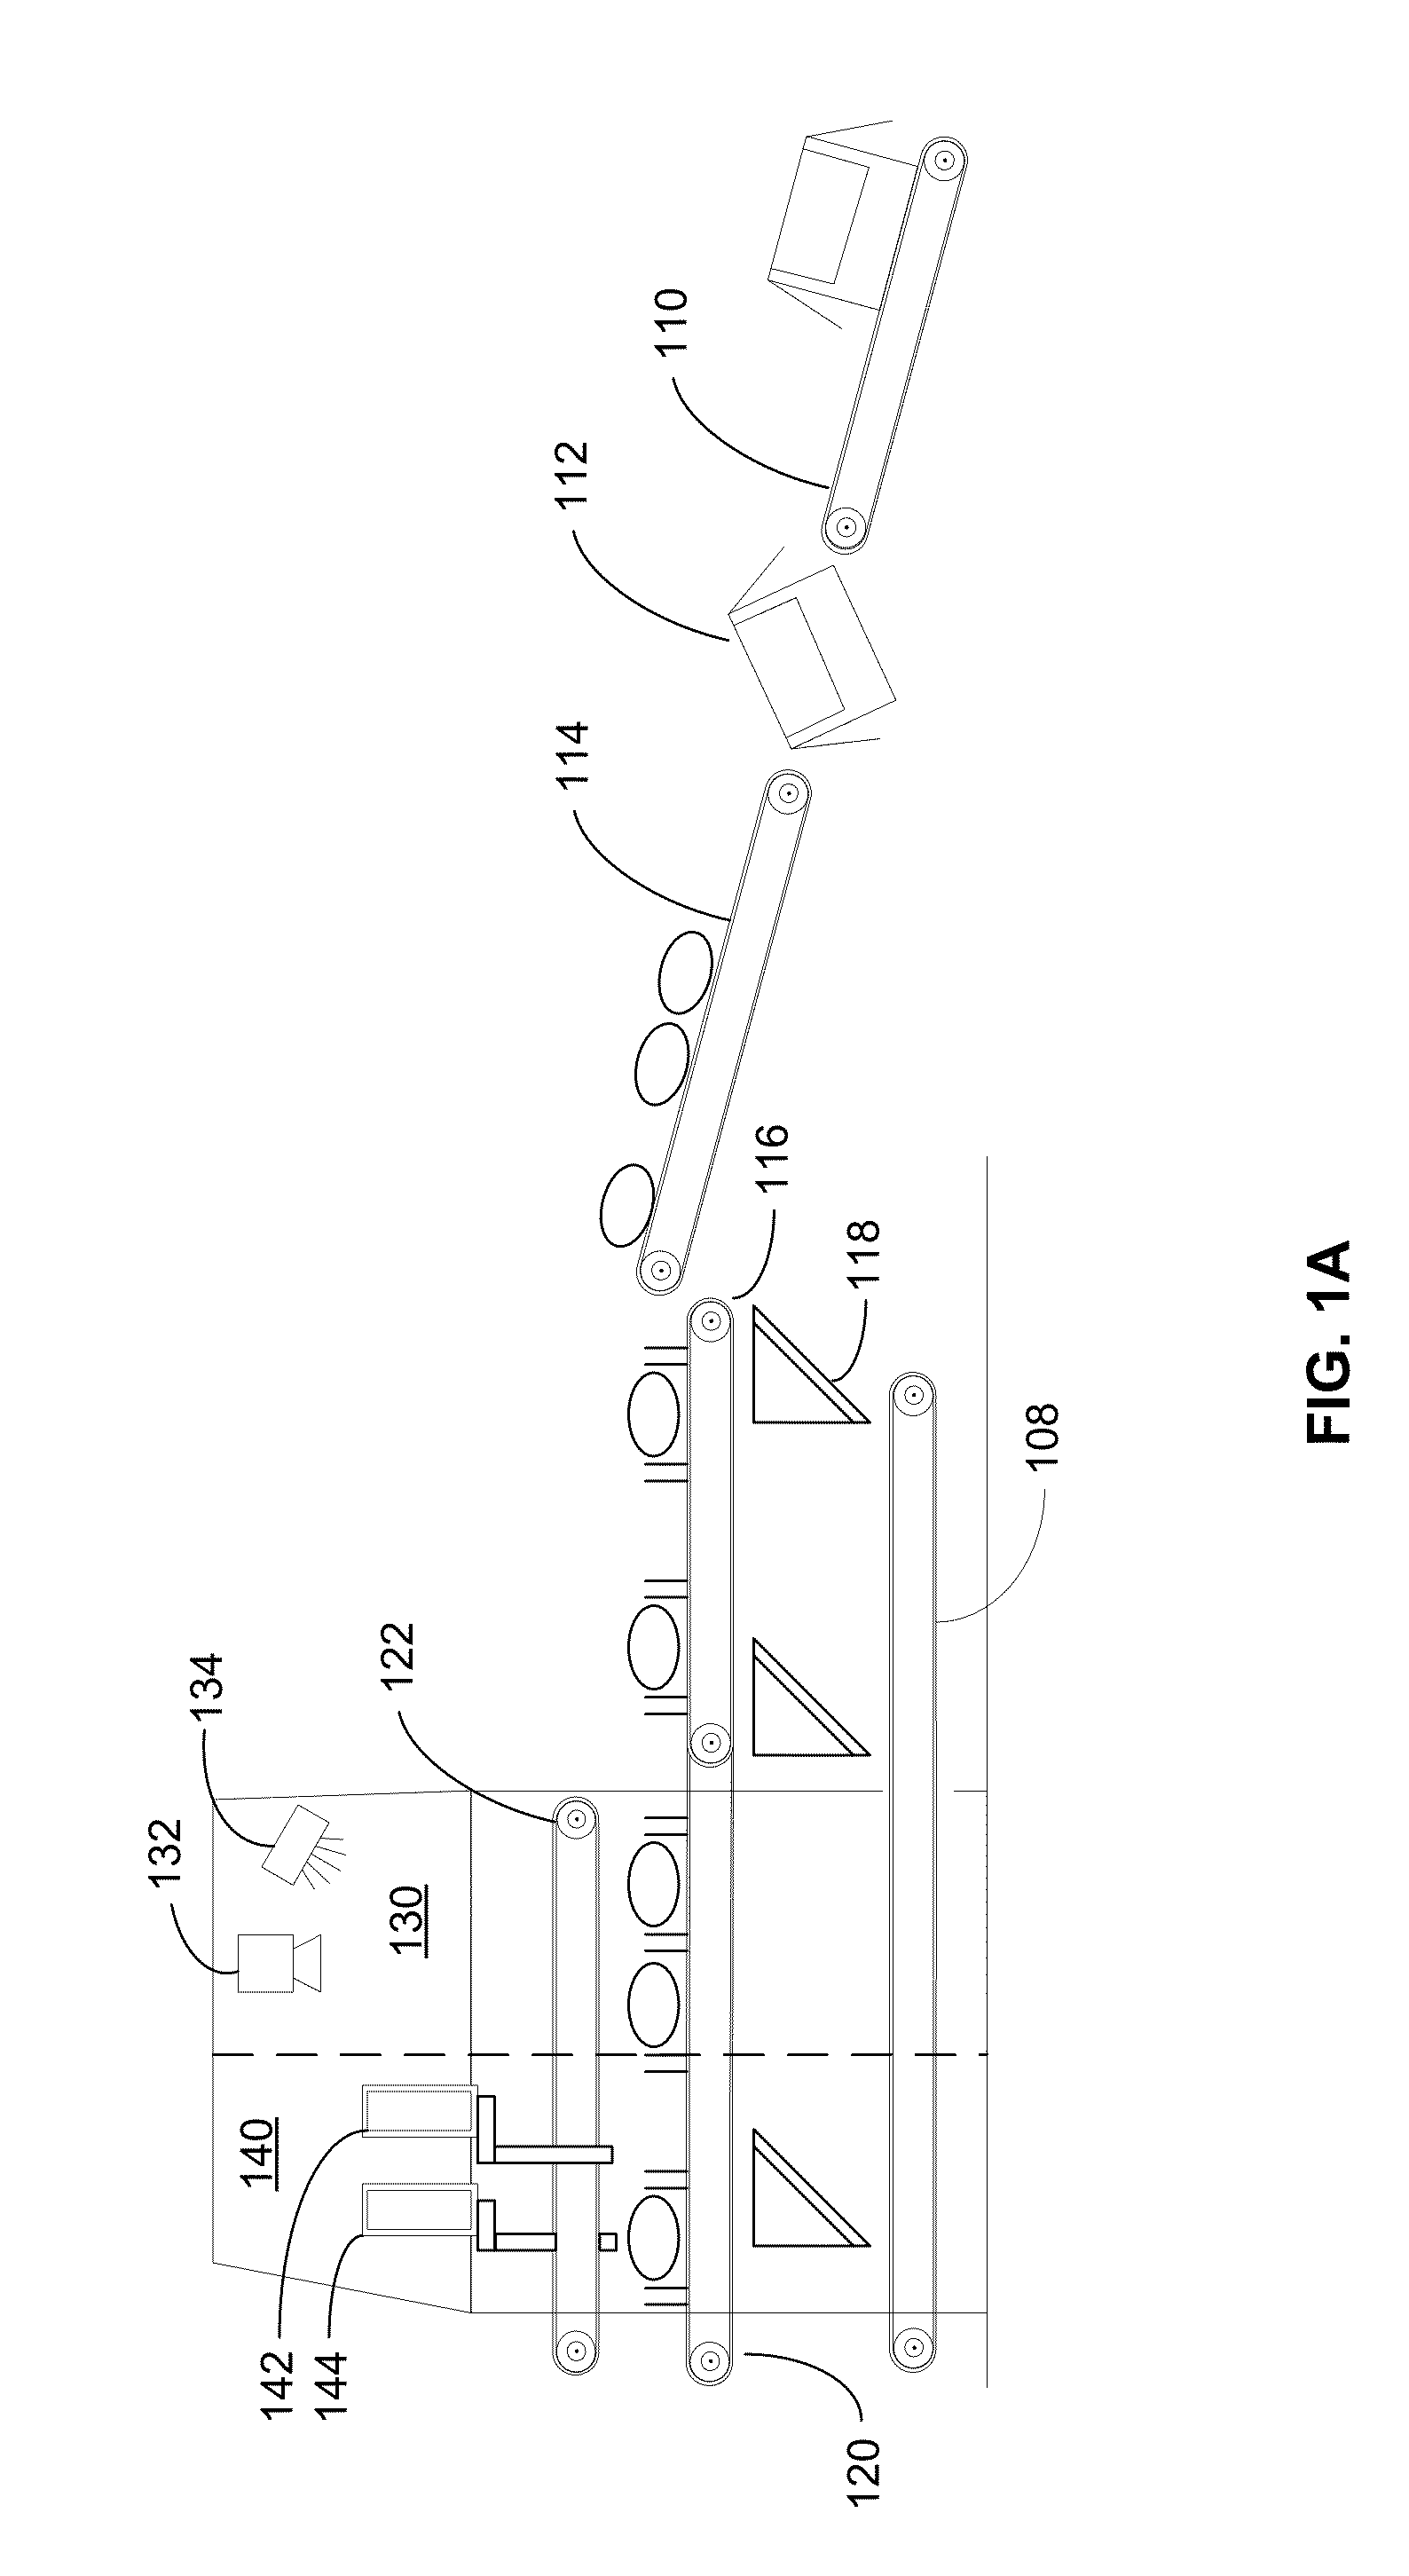 System for topping and tailing lettuce heads using a camera-guided servo-controlled water knife